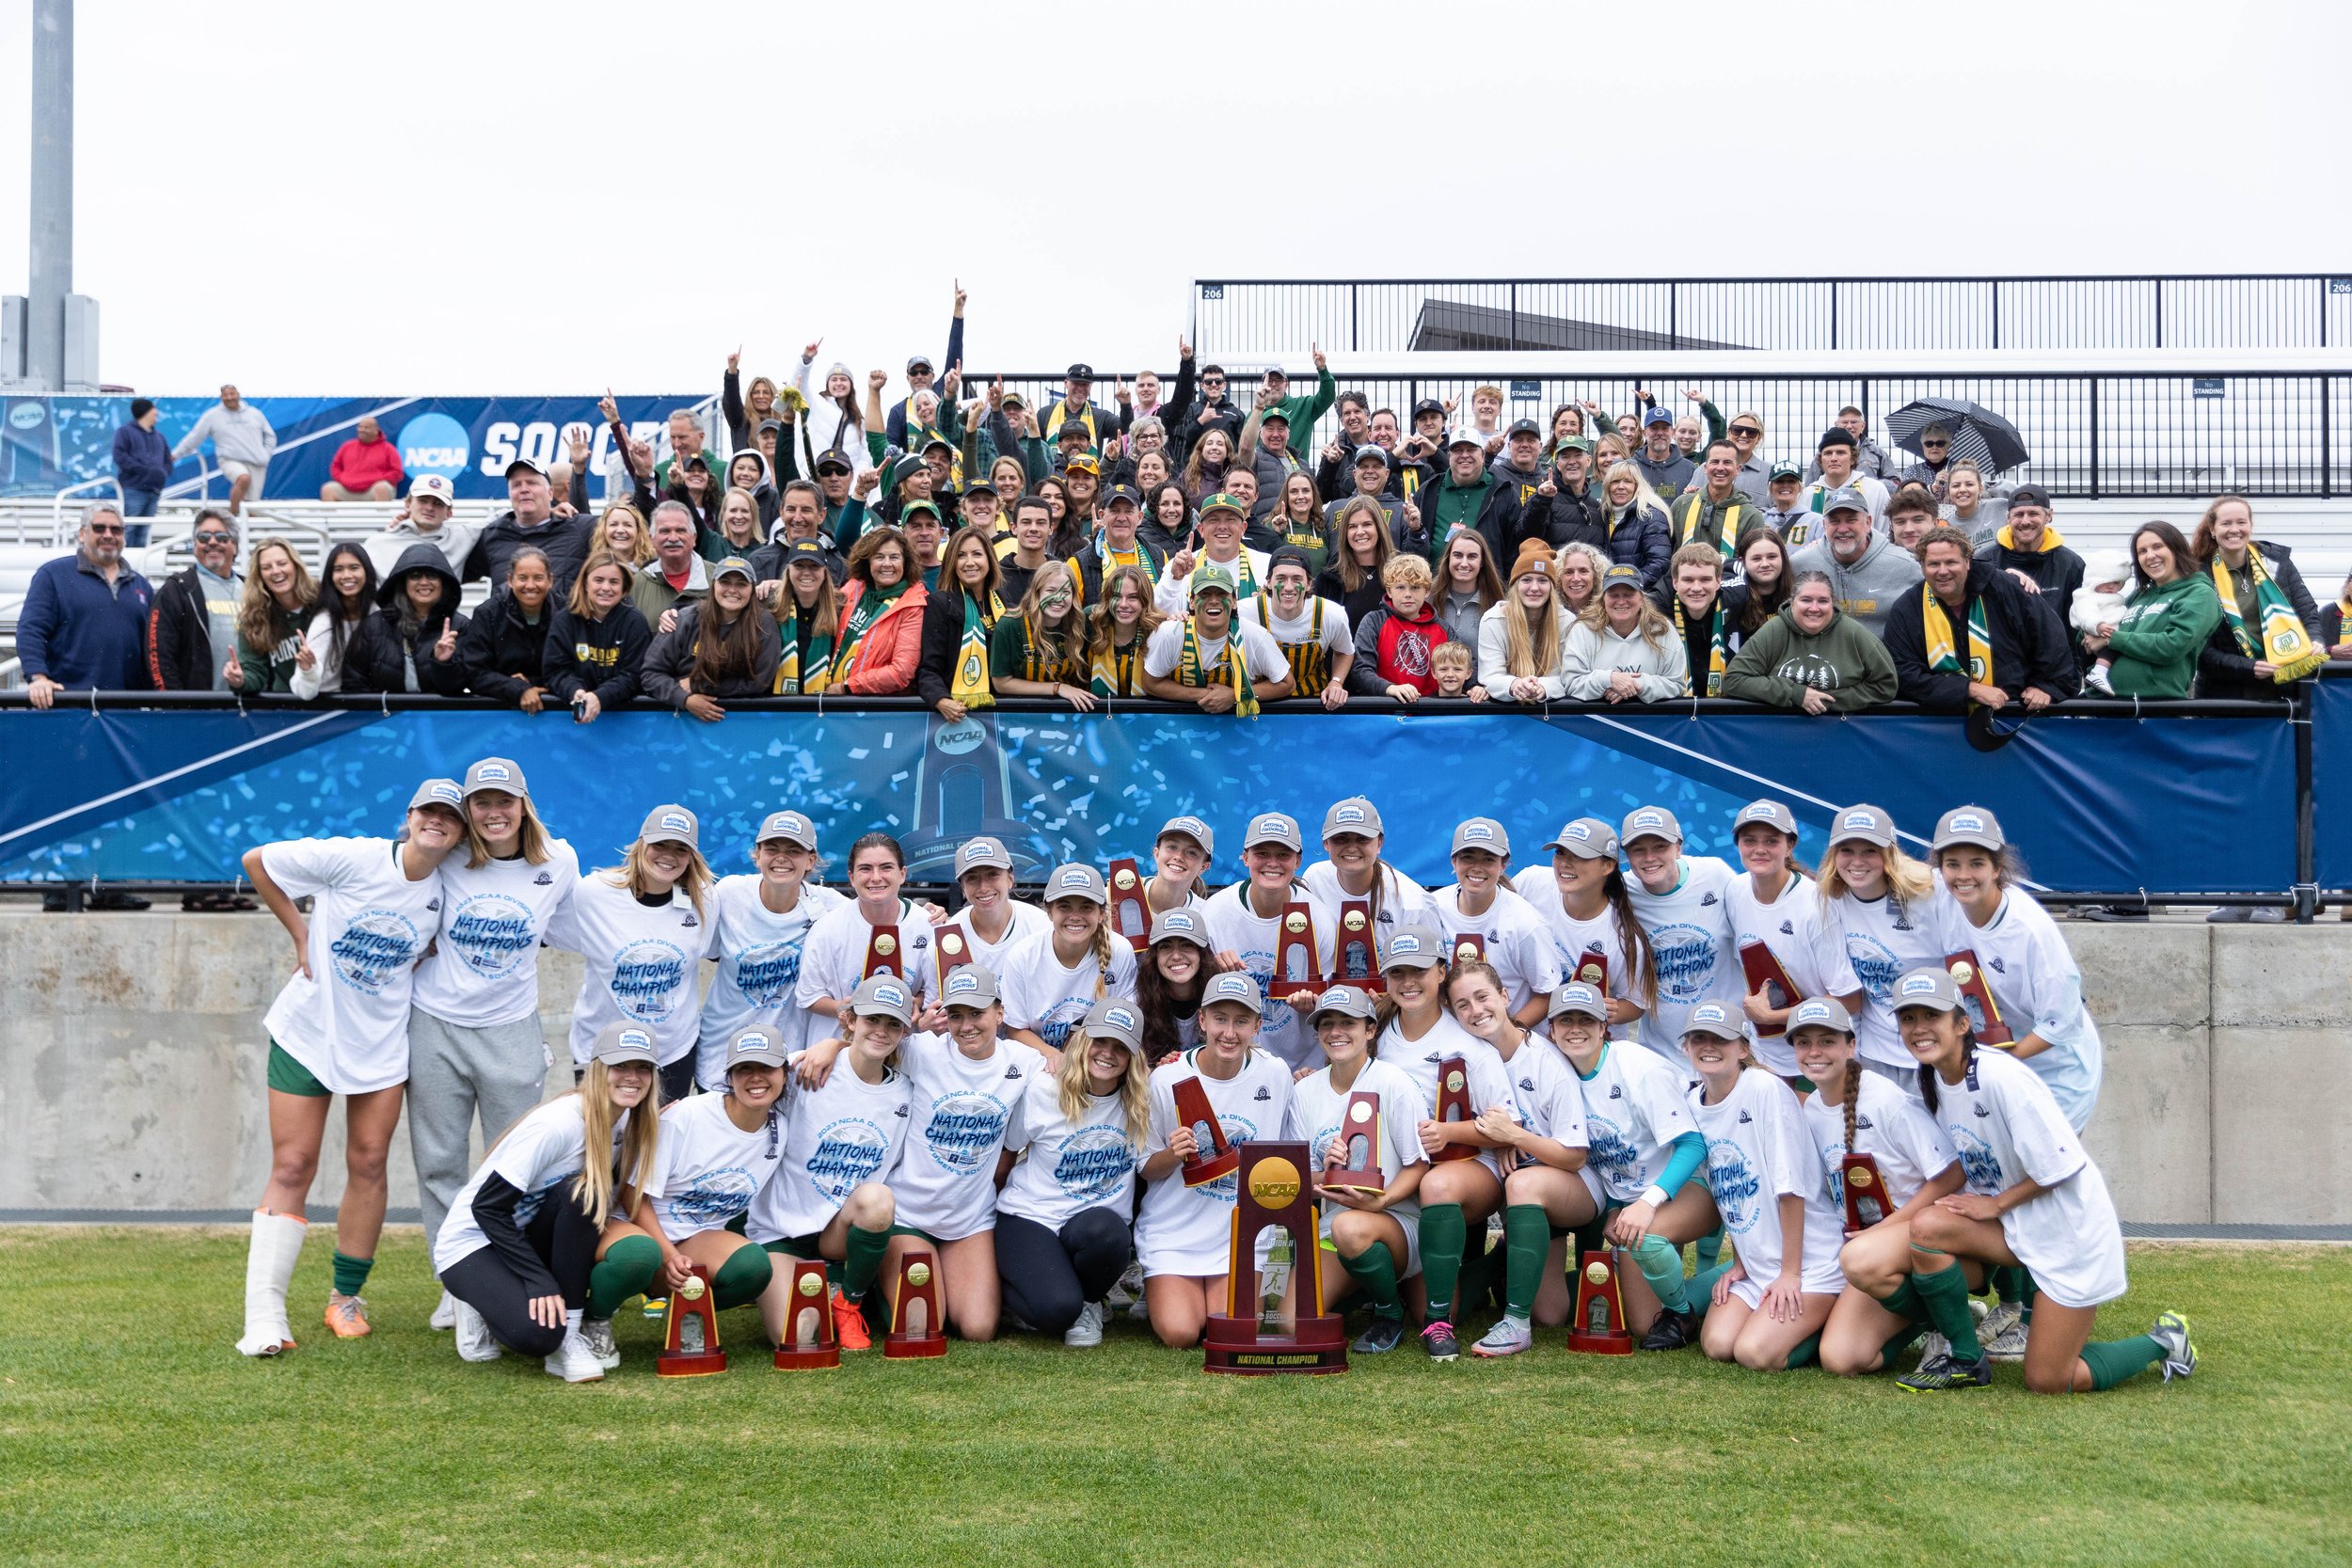  MATTHEWS, NORTH CAROLINA - DECEMBER 9: The Point Loma Sea Lions celebrate winning the national championship against Washburn Ichabods during the Division II Women's Soccer Championship held at Sportsplex Matthews on December 9, 2023 in Matthews, Nor